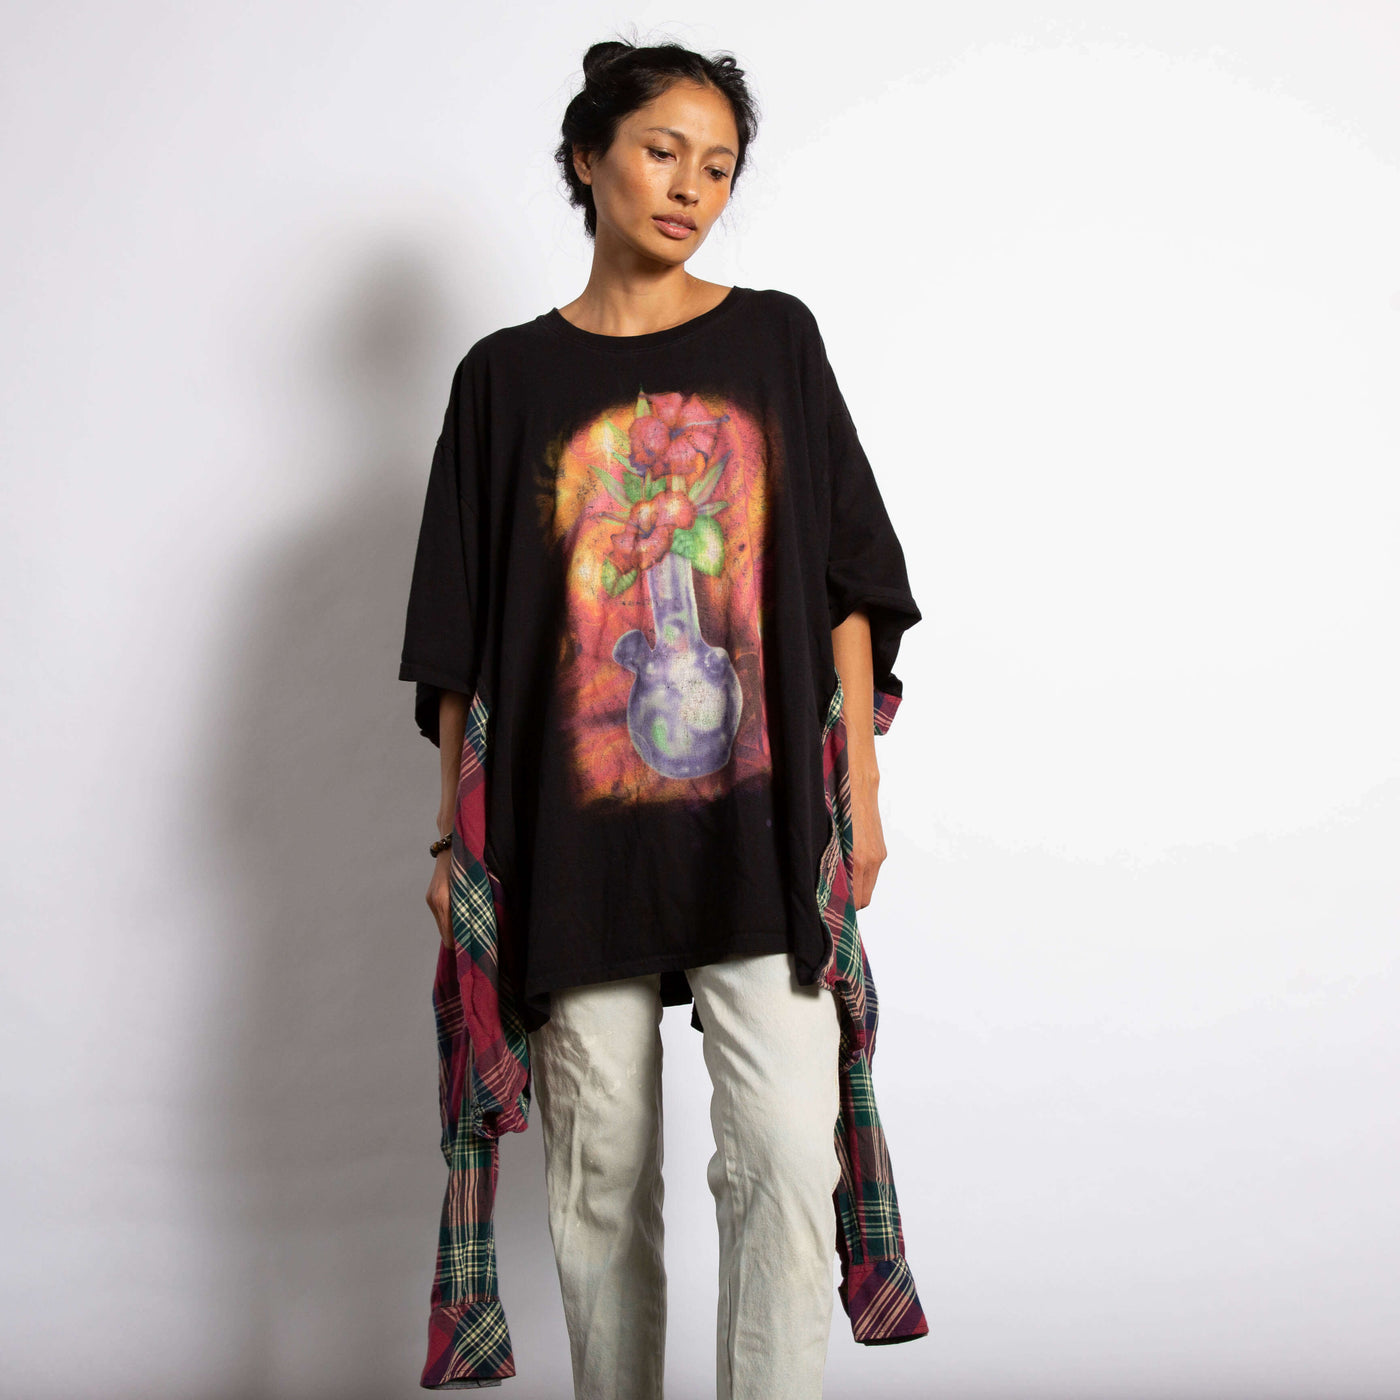 Model is wearing an oversized black Tee with a graphic of a glass bong with flowers.  On the sides of the tee the sides of a flannel shirt are sewn on